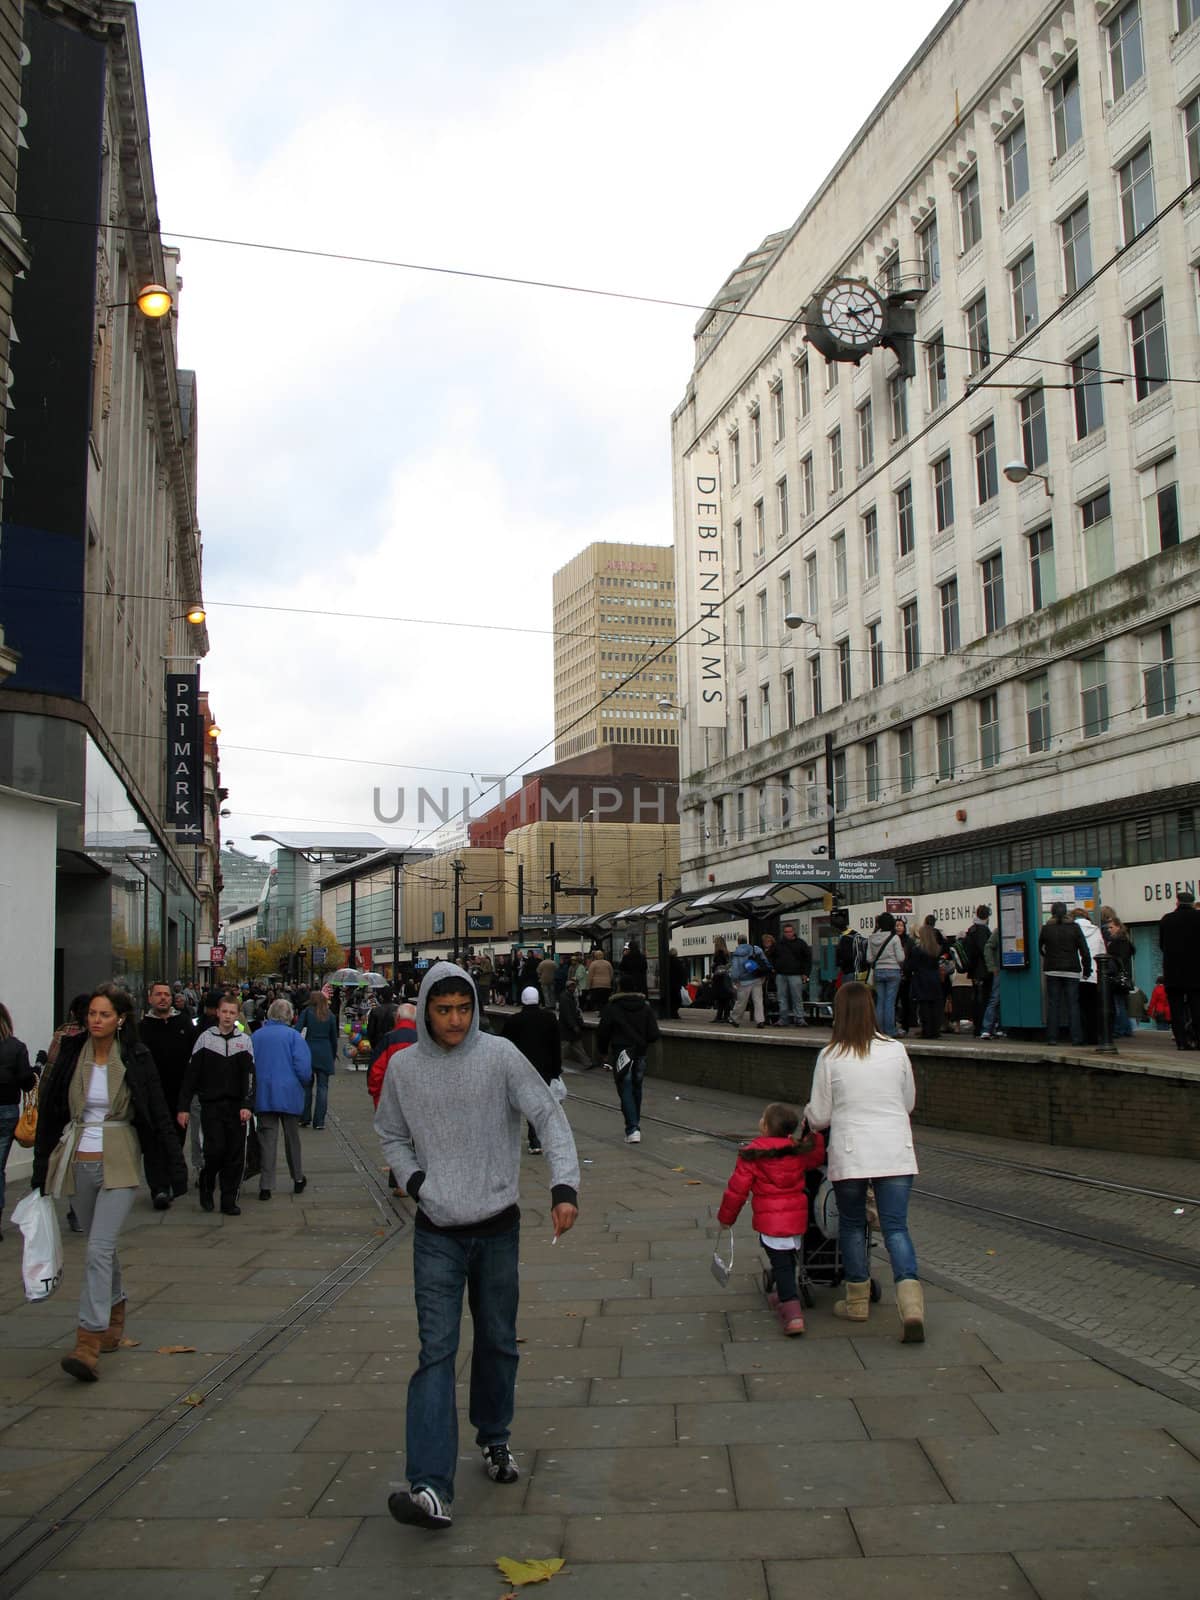 Shoppers in Manchester England by green308